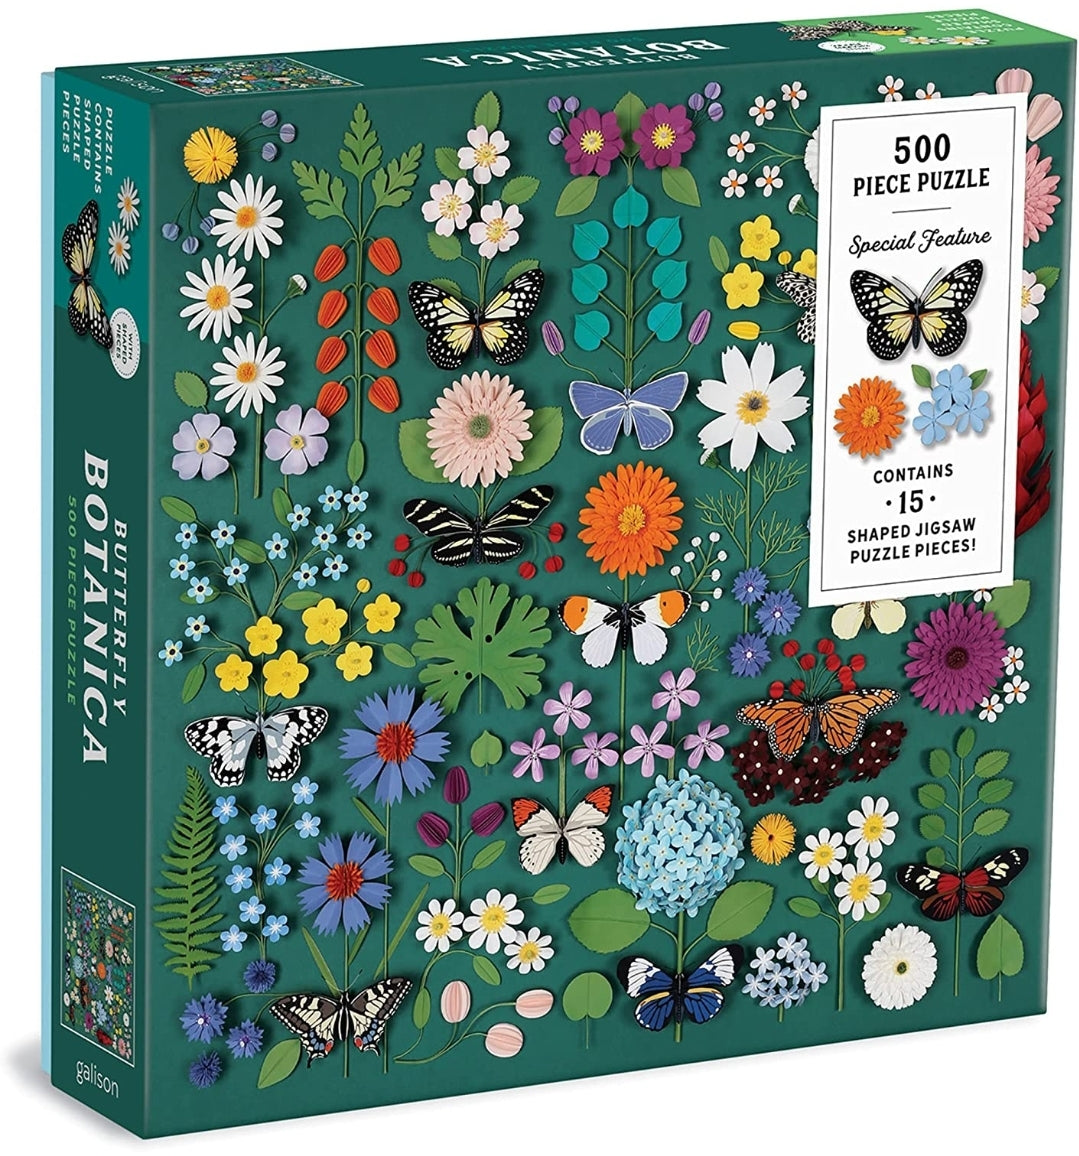 Galison Butterfly Botanica Puzzle, 500 Pieces